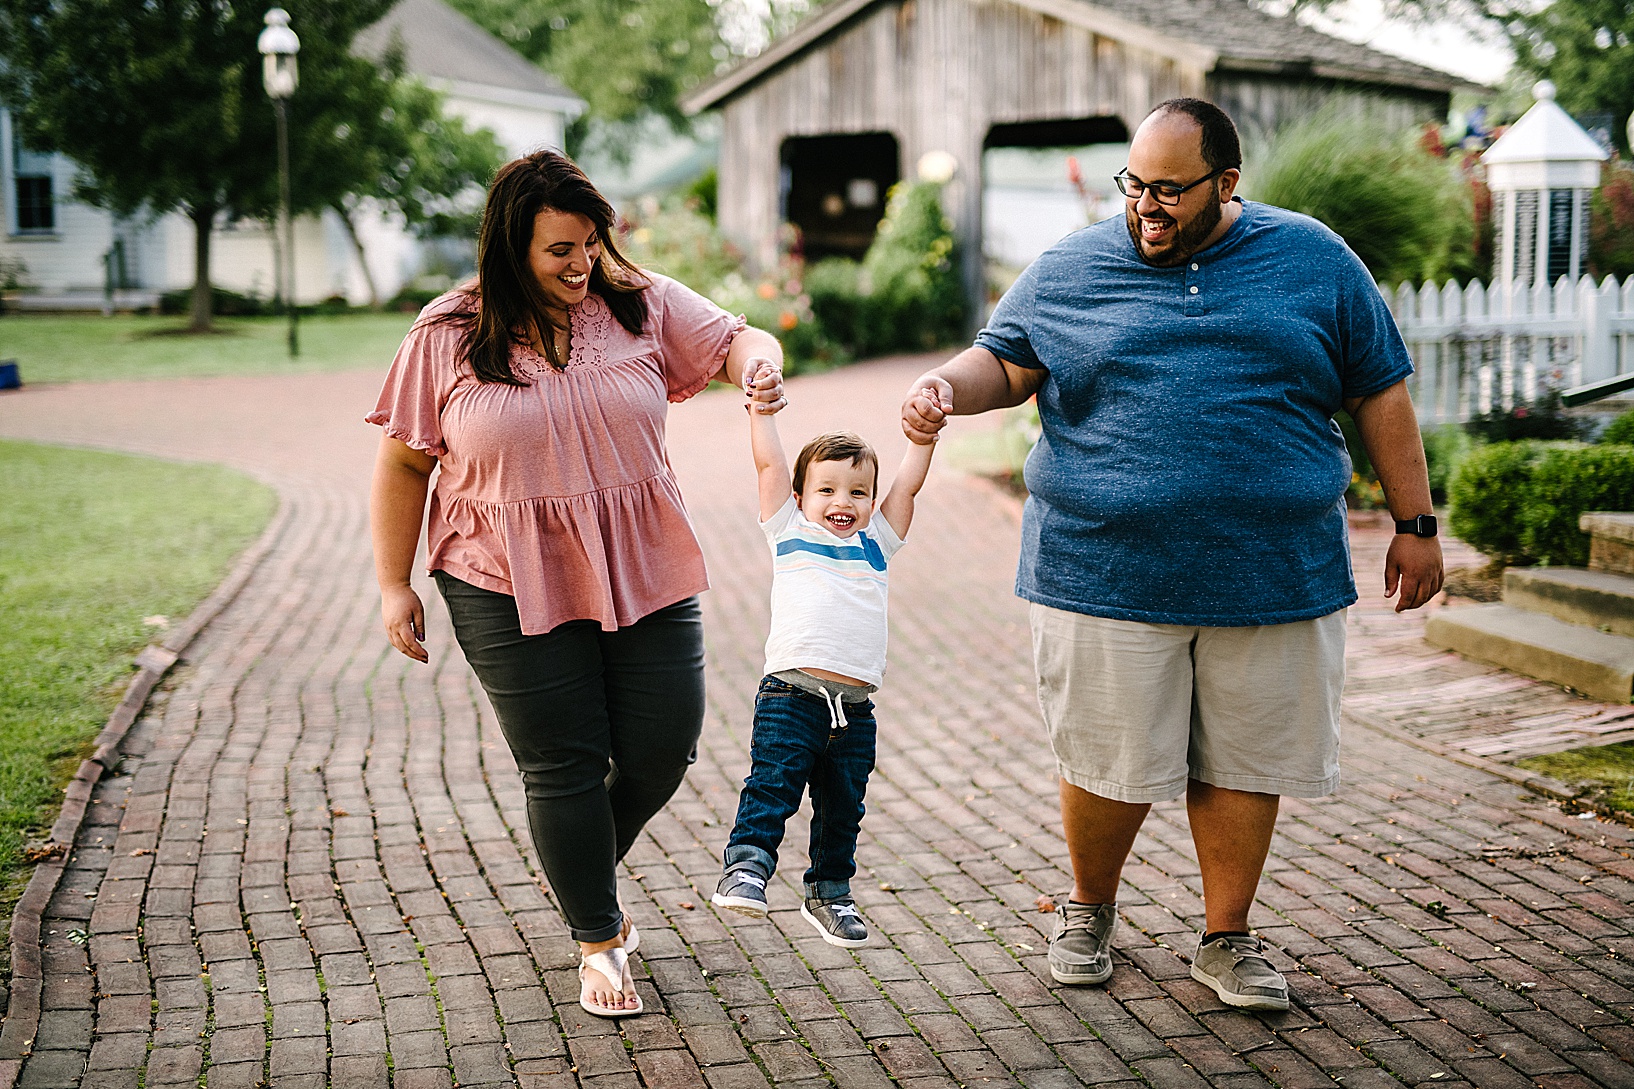 Woman in pink shirt and man in blue shirt walk along a brick pathway and swing their young son by the hands between them while they smile